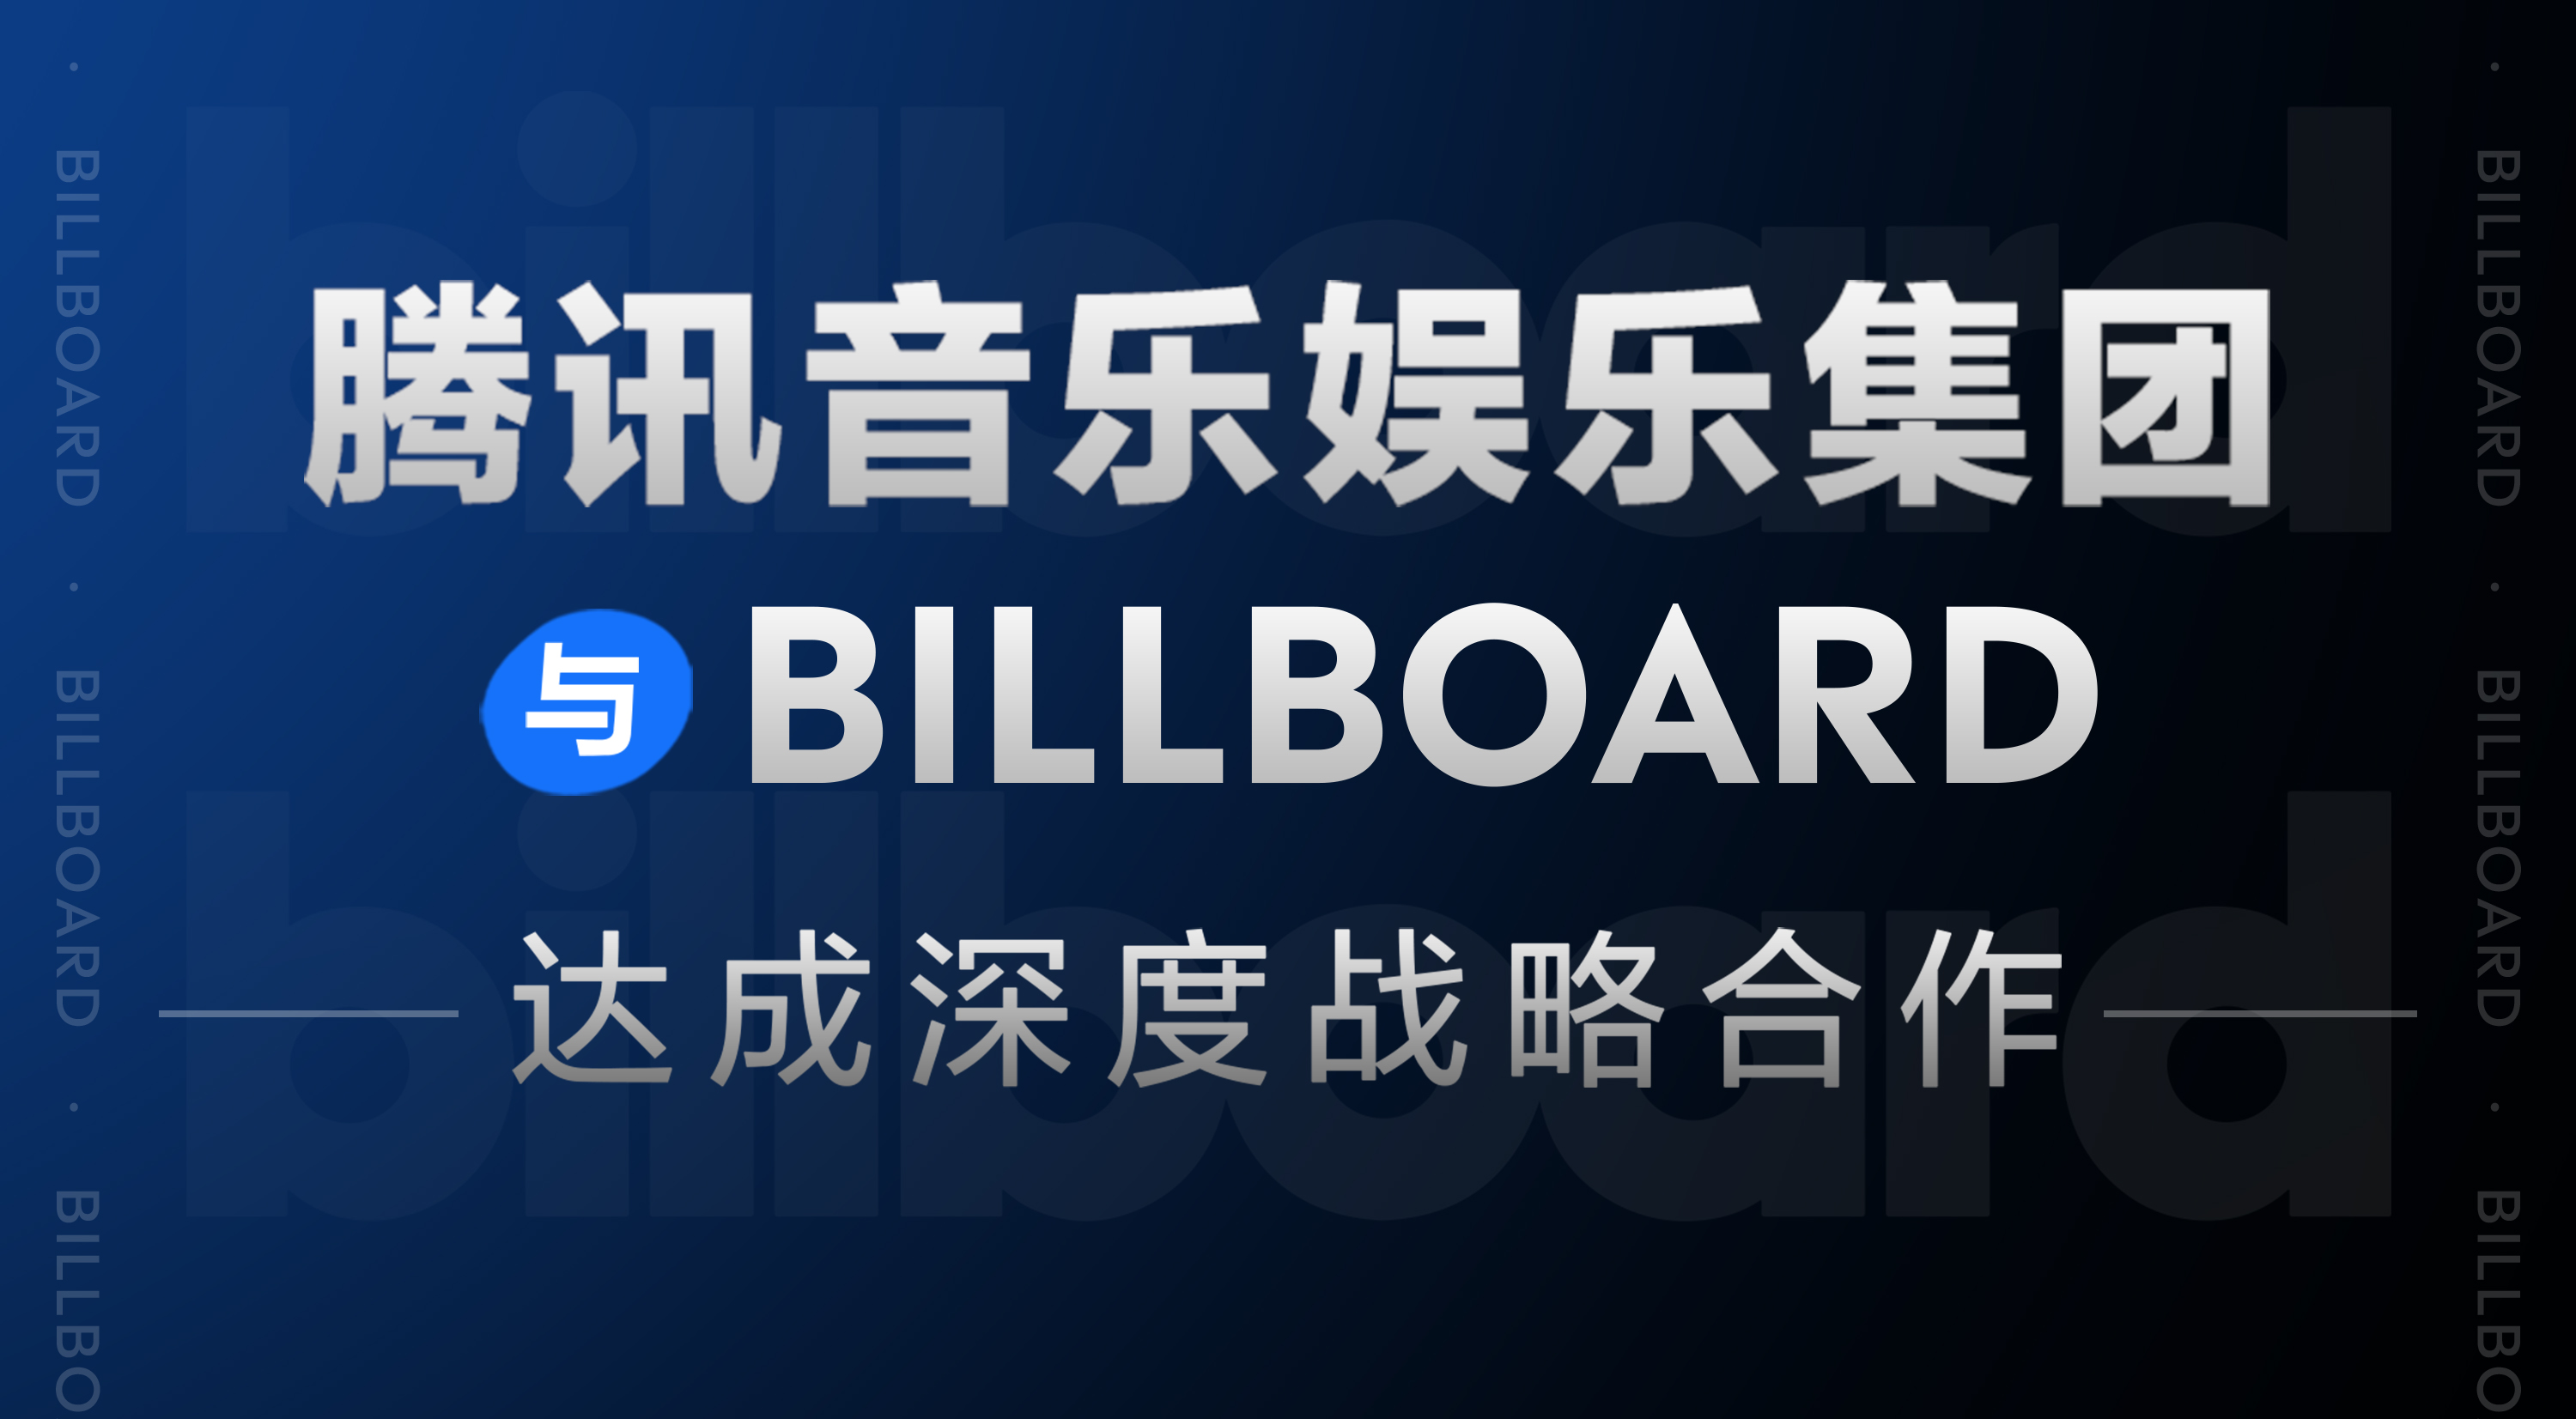 Tencent Music Entertainment Group Partners with Billboard to Promote Global Development of High-Quality Chinese Music